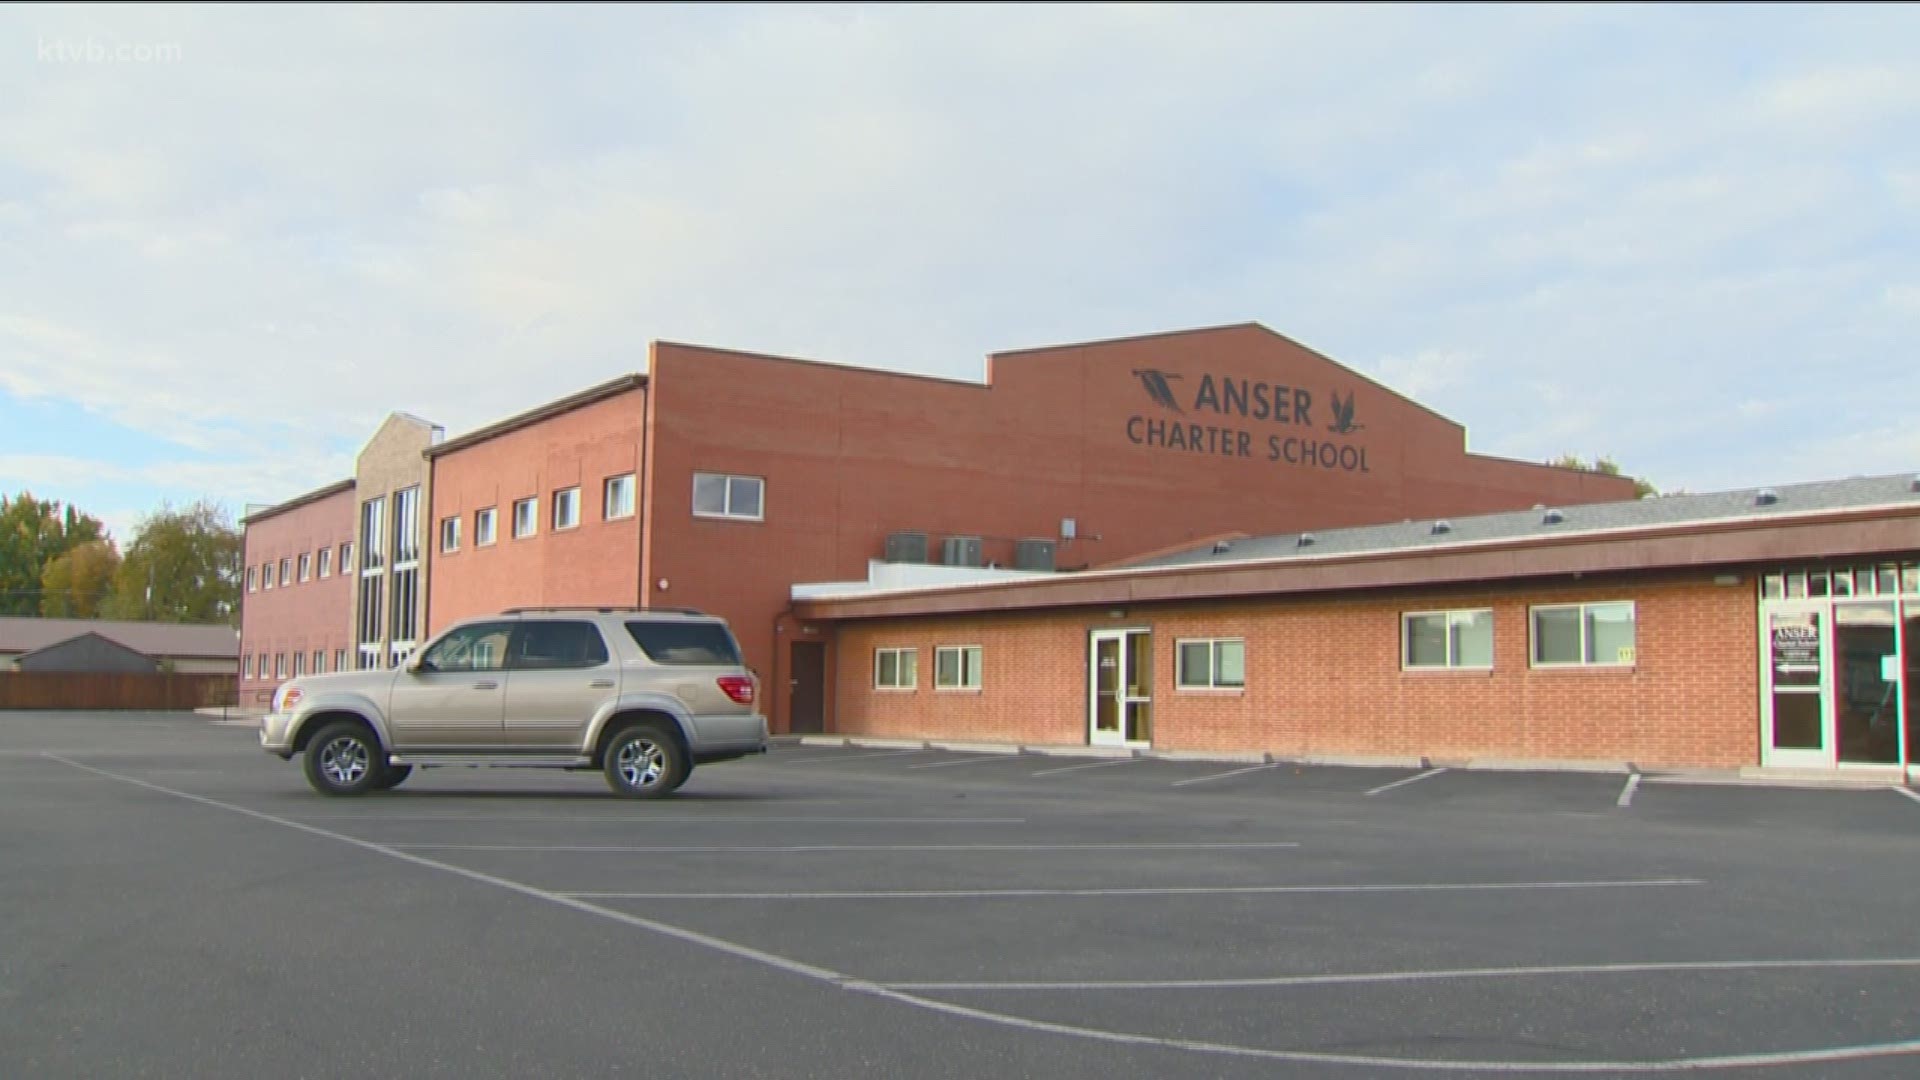 Anser's school board voted unanimously on Thursday to leave the Boise School District. The district responded with concerns over Anser's "lack of student diversity"